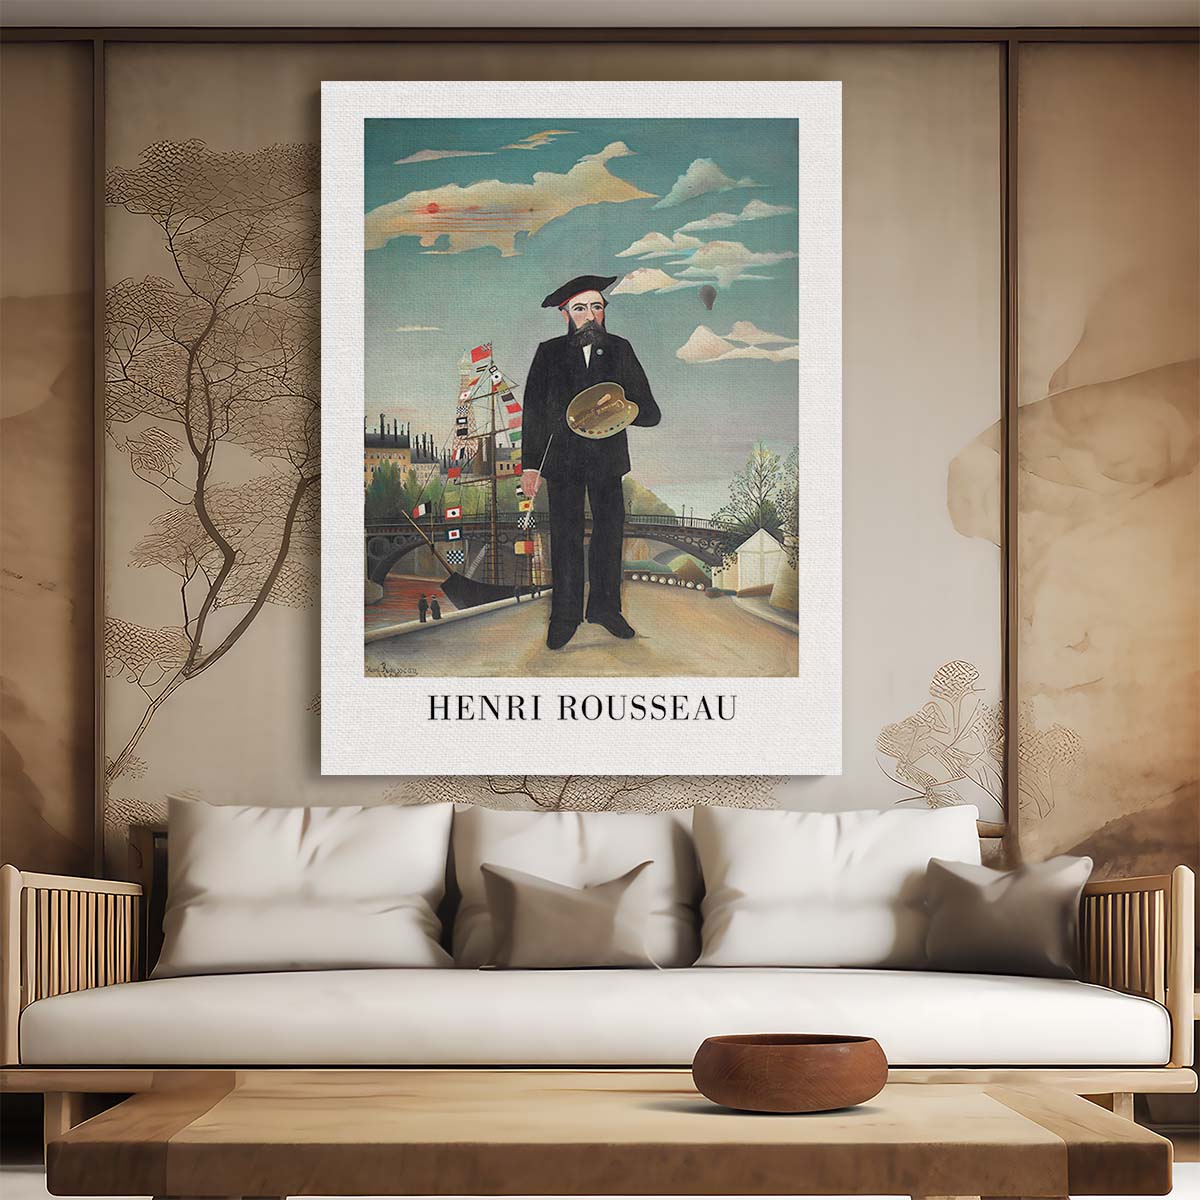 Henri Rousseau 1890 Self-Portrait, Acrylic Painted Poster by Luxuriance Designs, made in USA